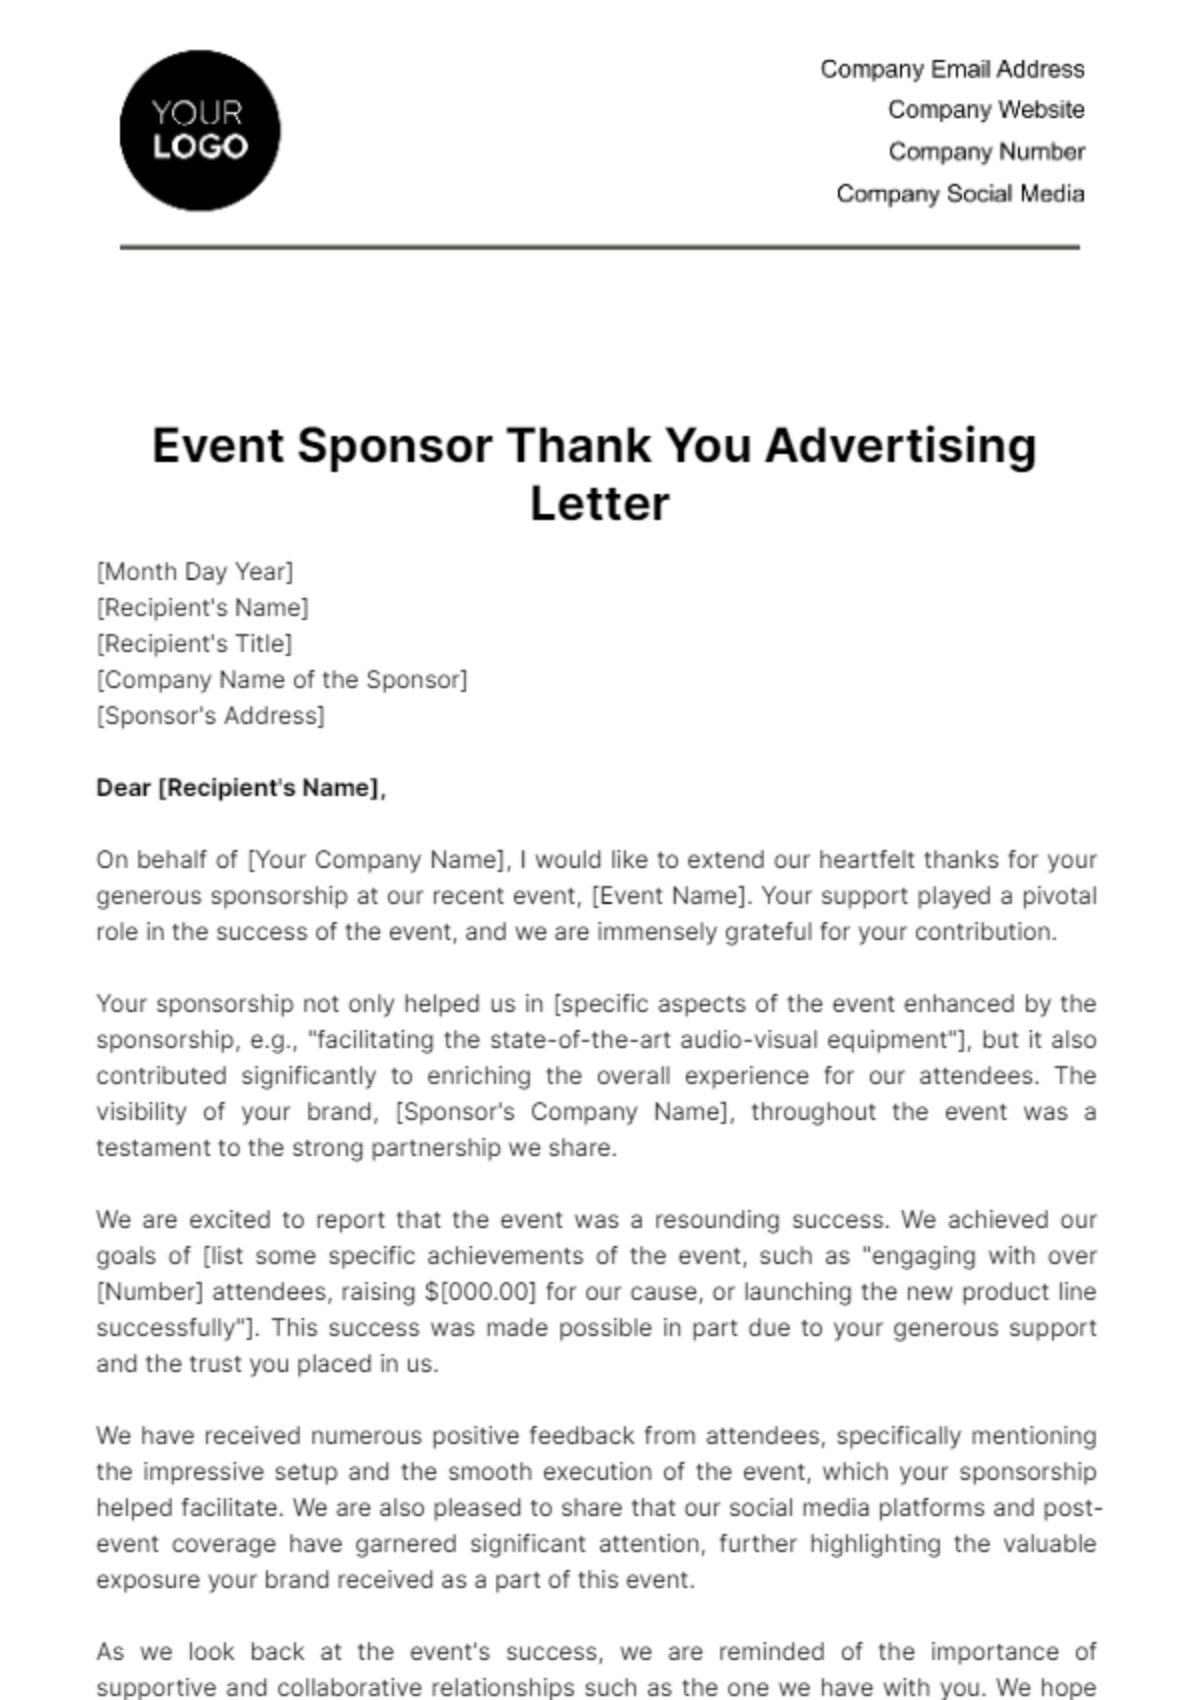 Free Event Sponsor Thank You Advertising Letter Template